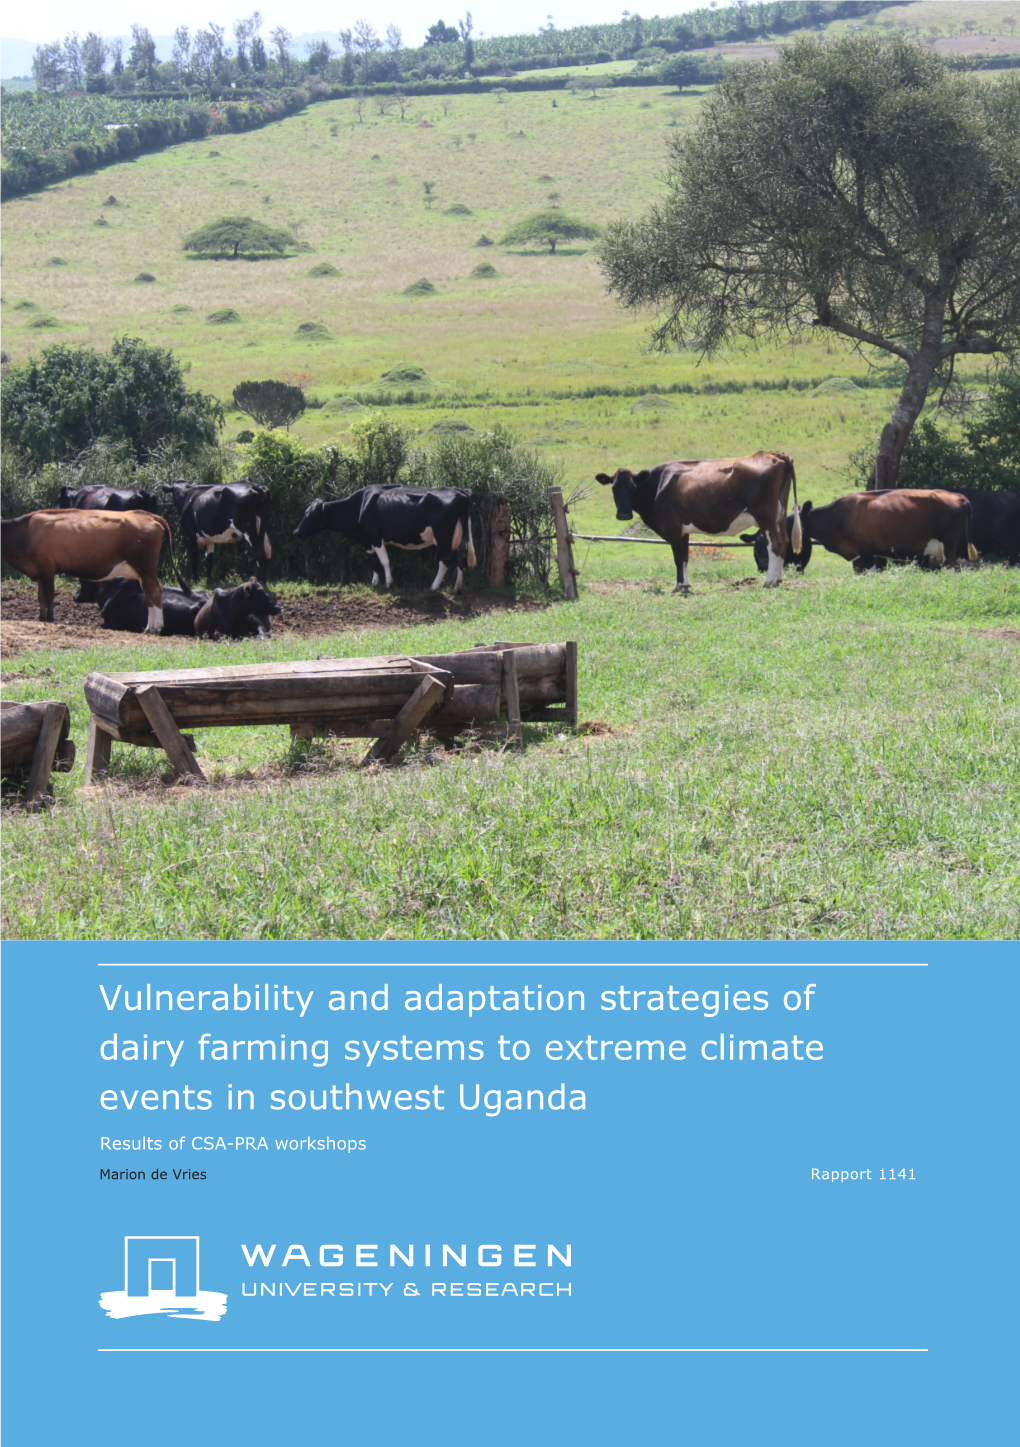 Vulnerability and Adaptation Strategies of Dairy Farming Systems to Extreme Climate Events in Southwest Uganda